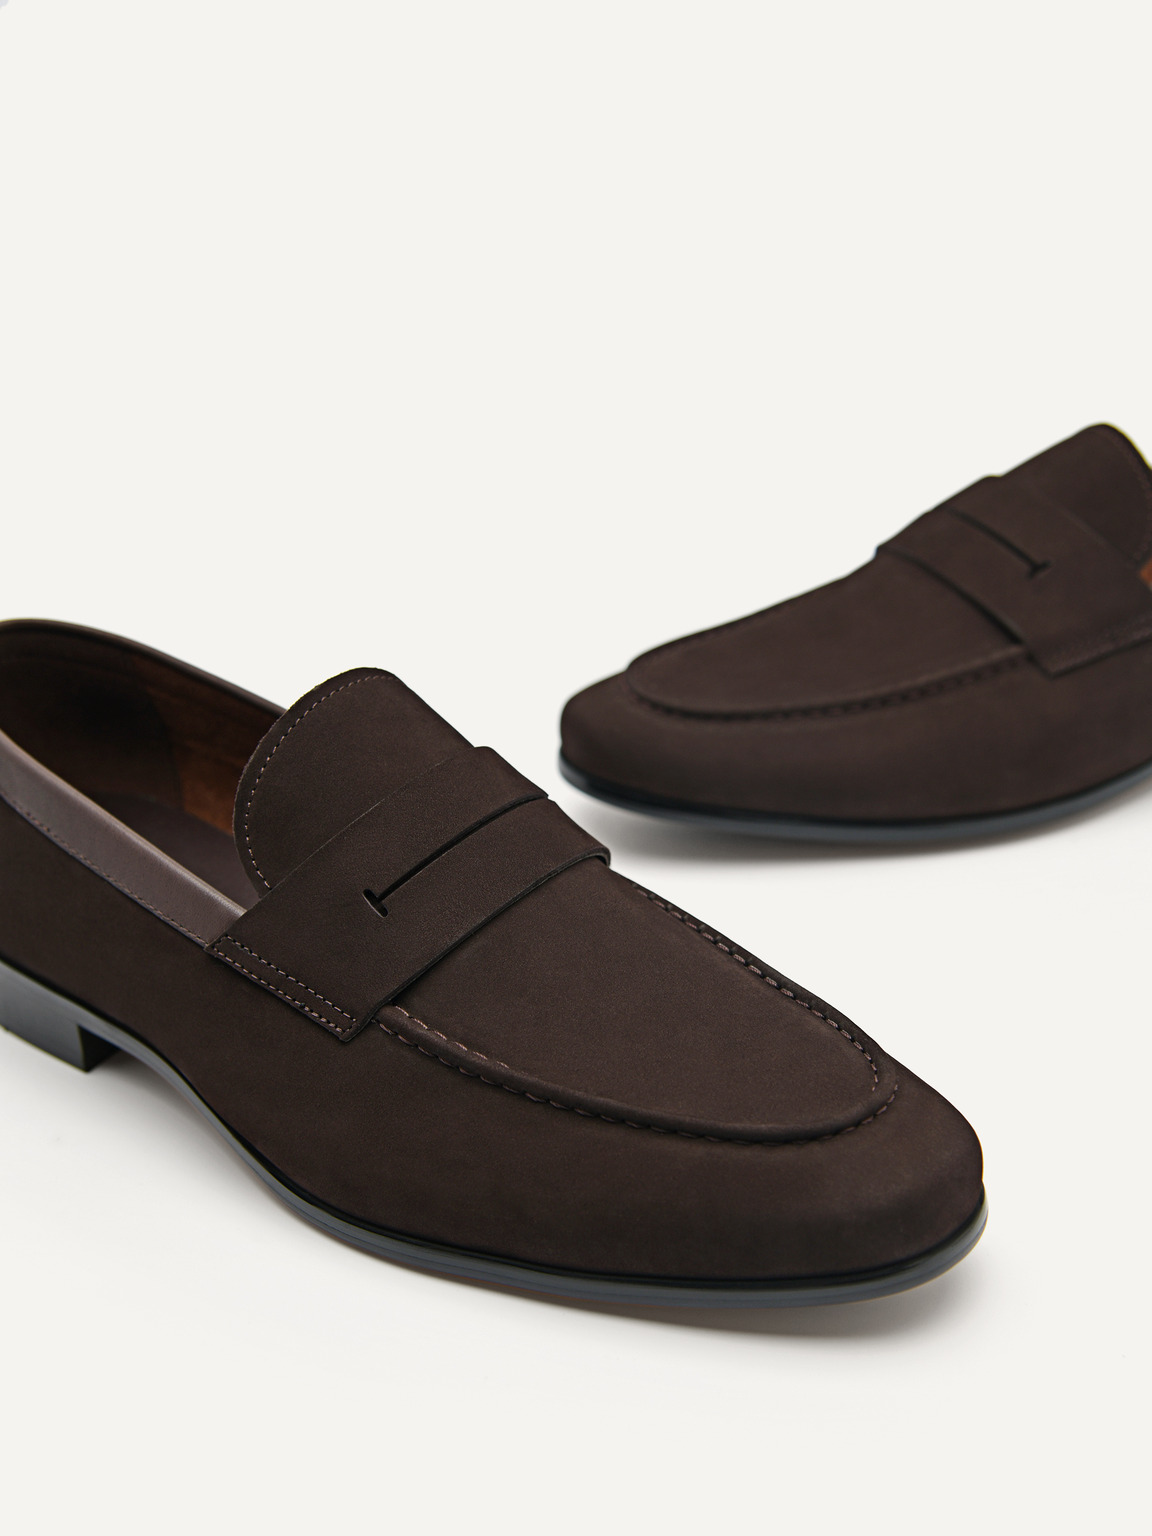 Firth Leather Loafers, Dark Brown